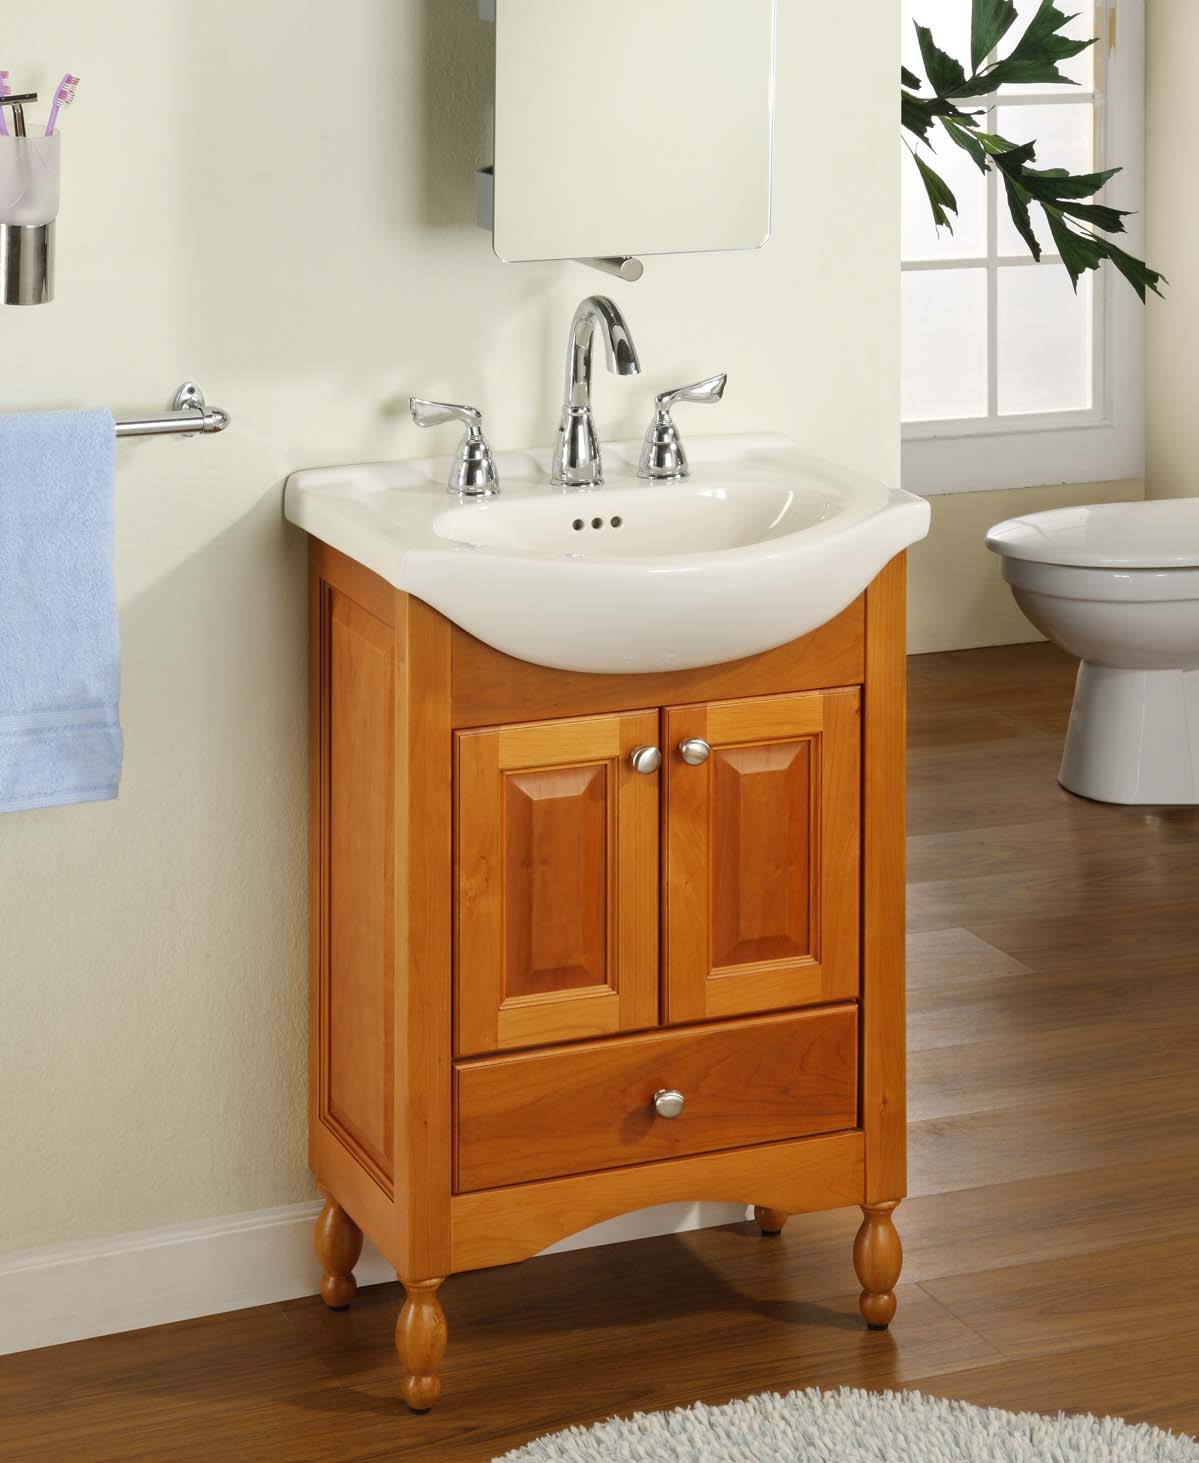 Empire Industries - WINDSOR 22" Shallow Depth Vanity with ...